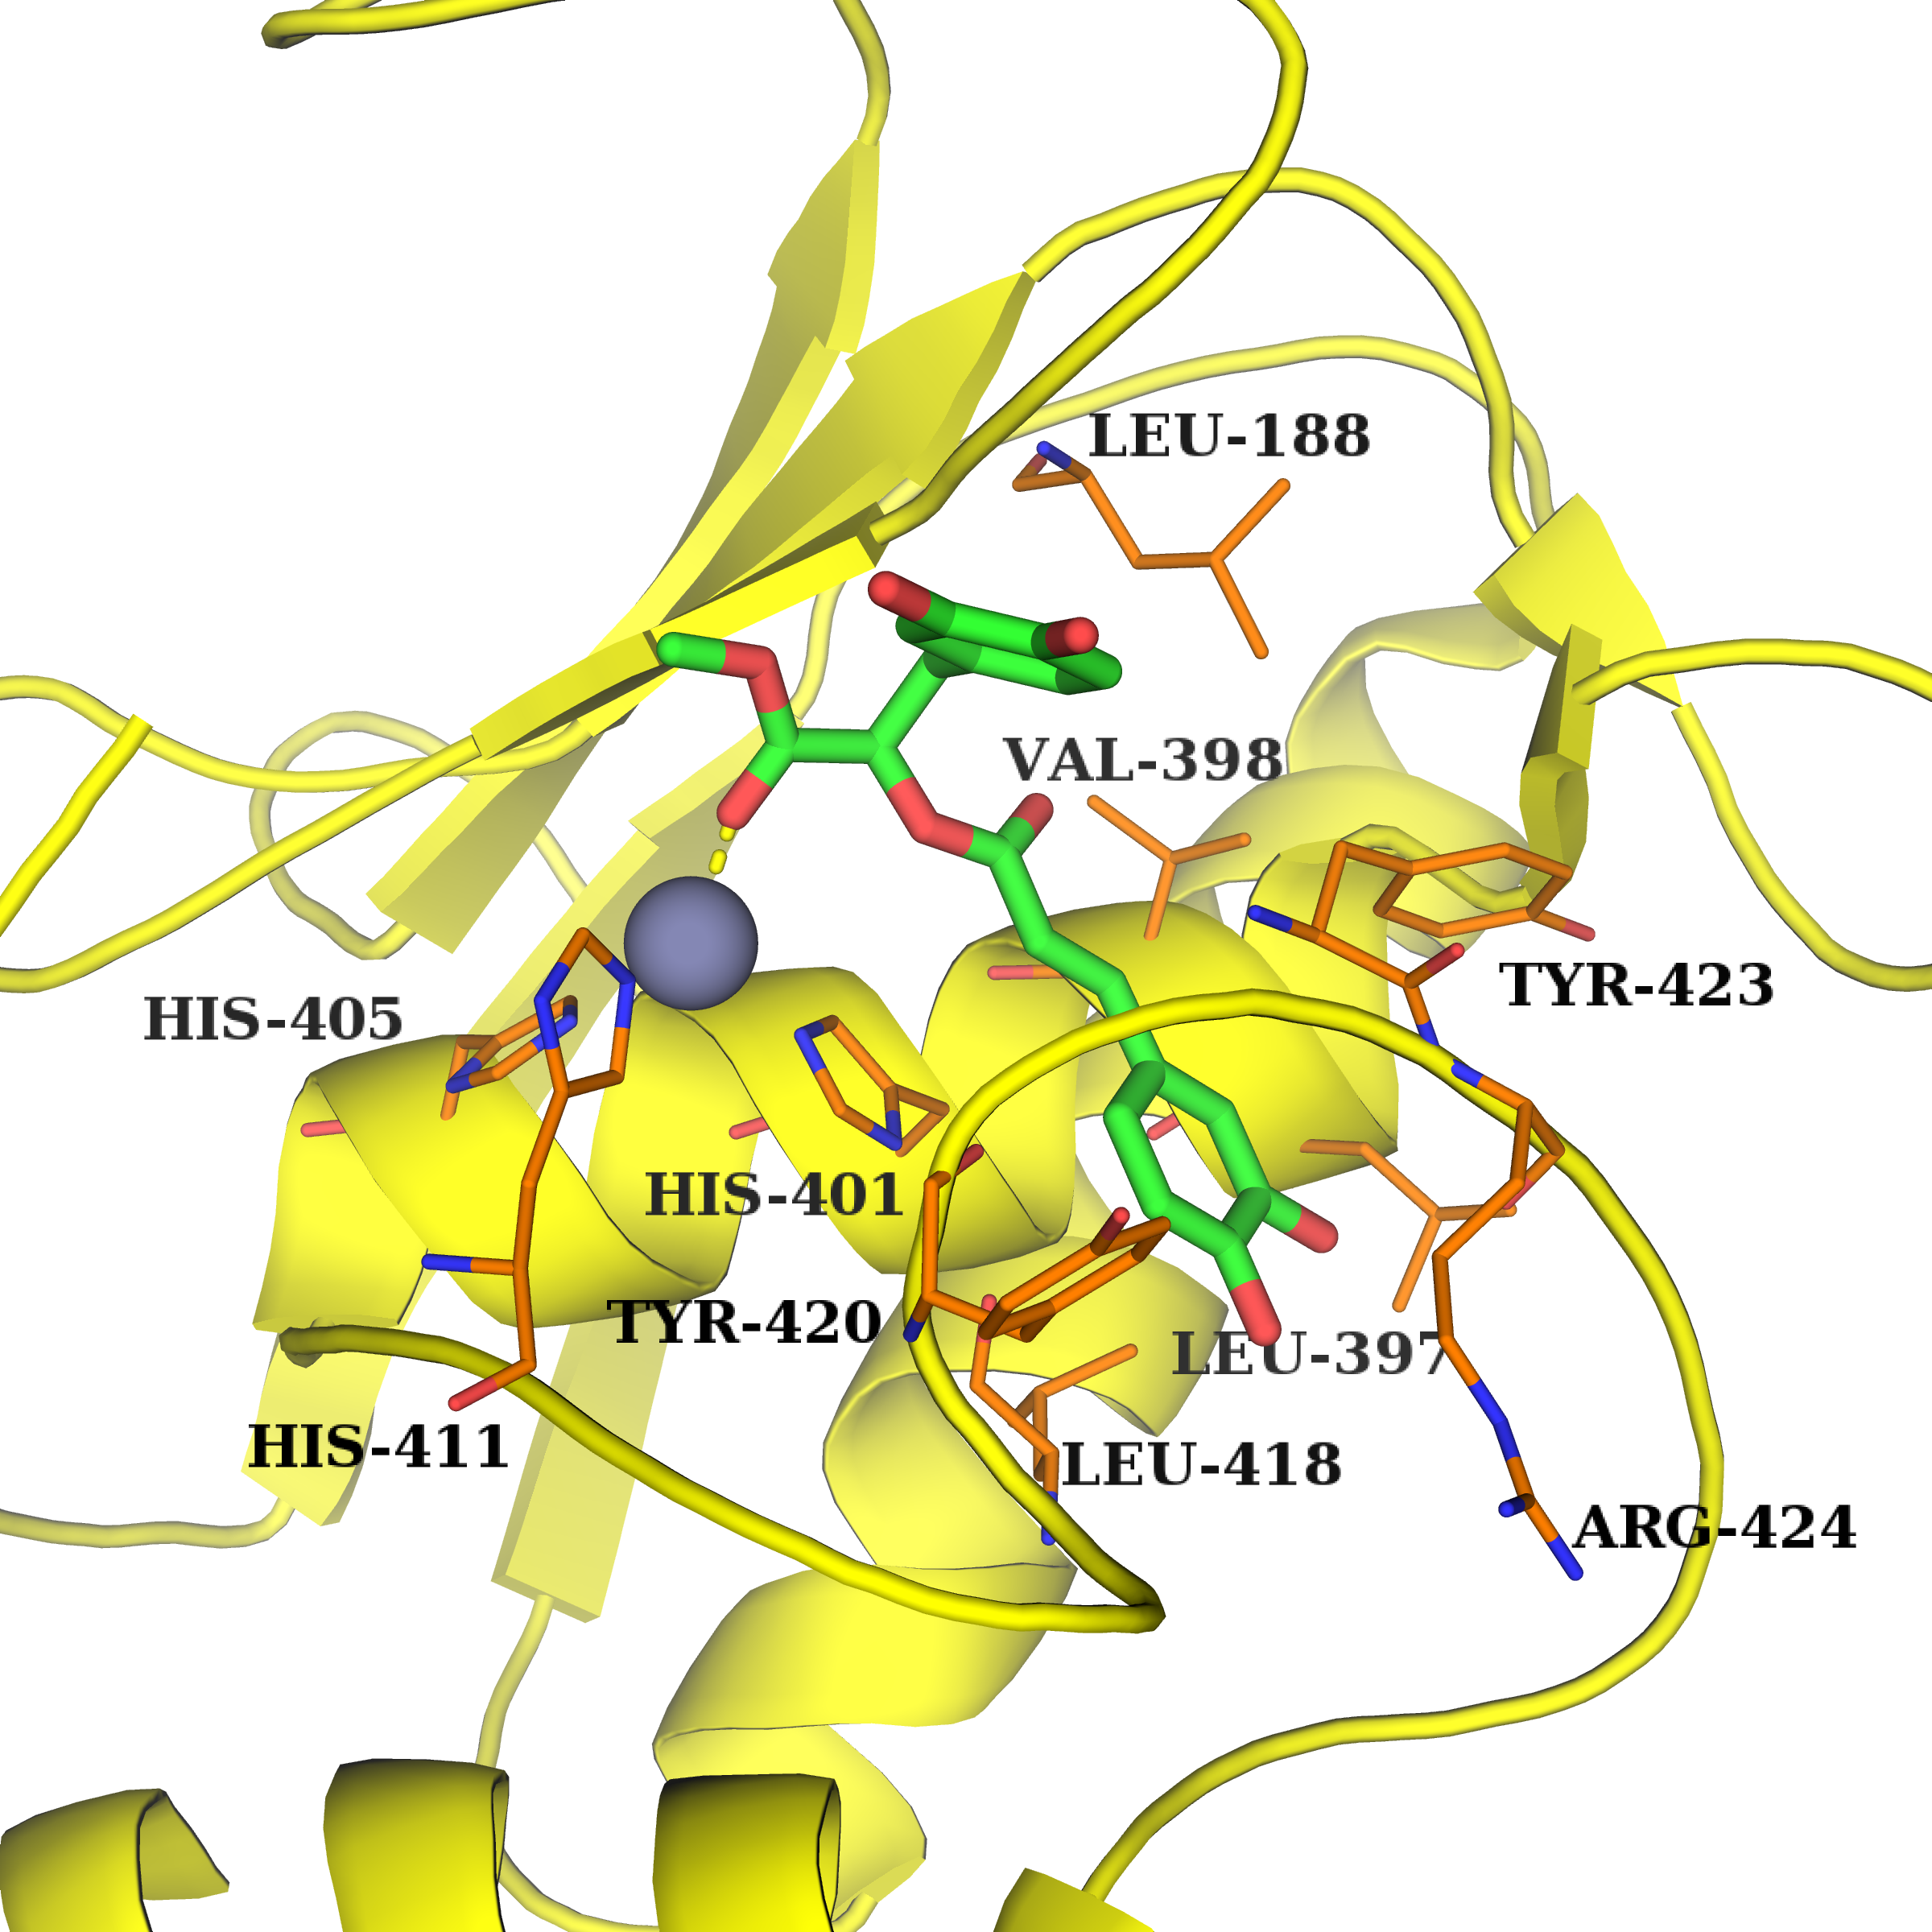 Identification of novel MMPs inhibitors from the natrual product database